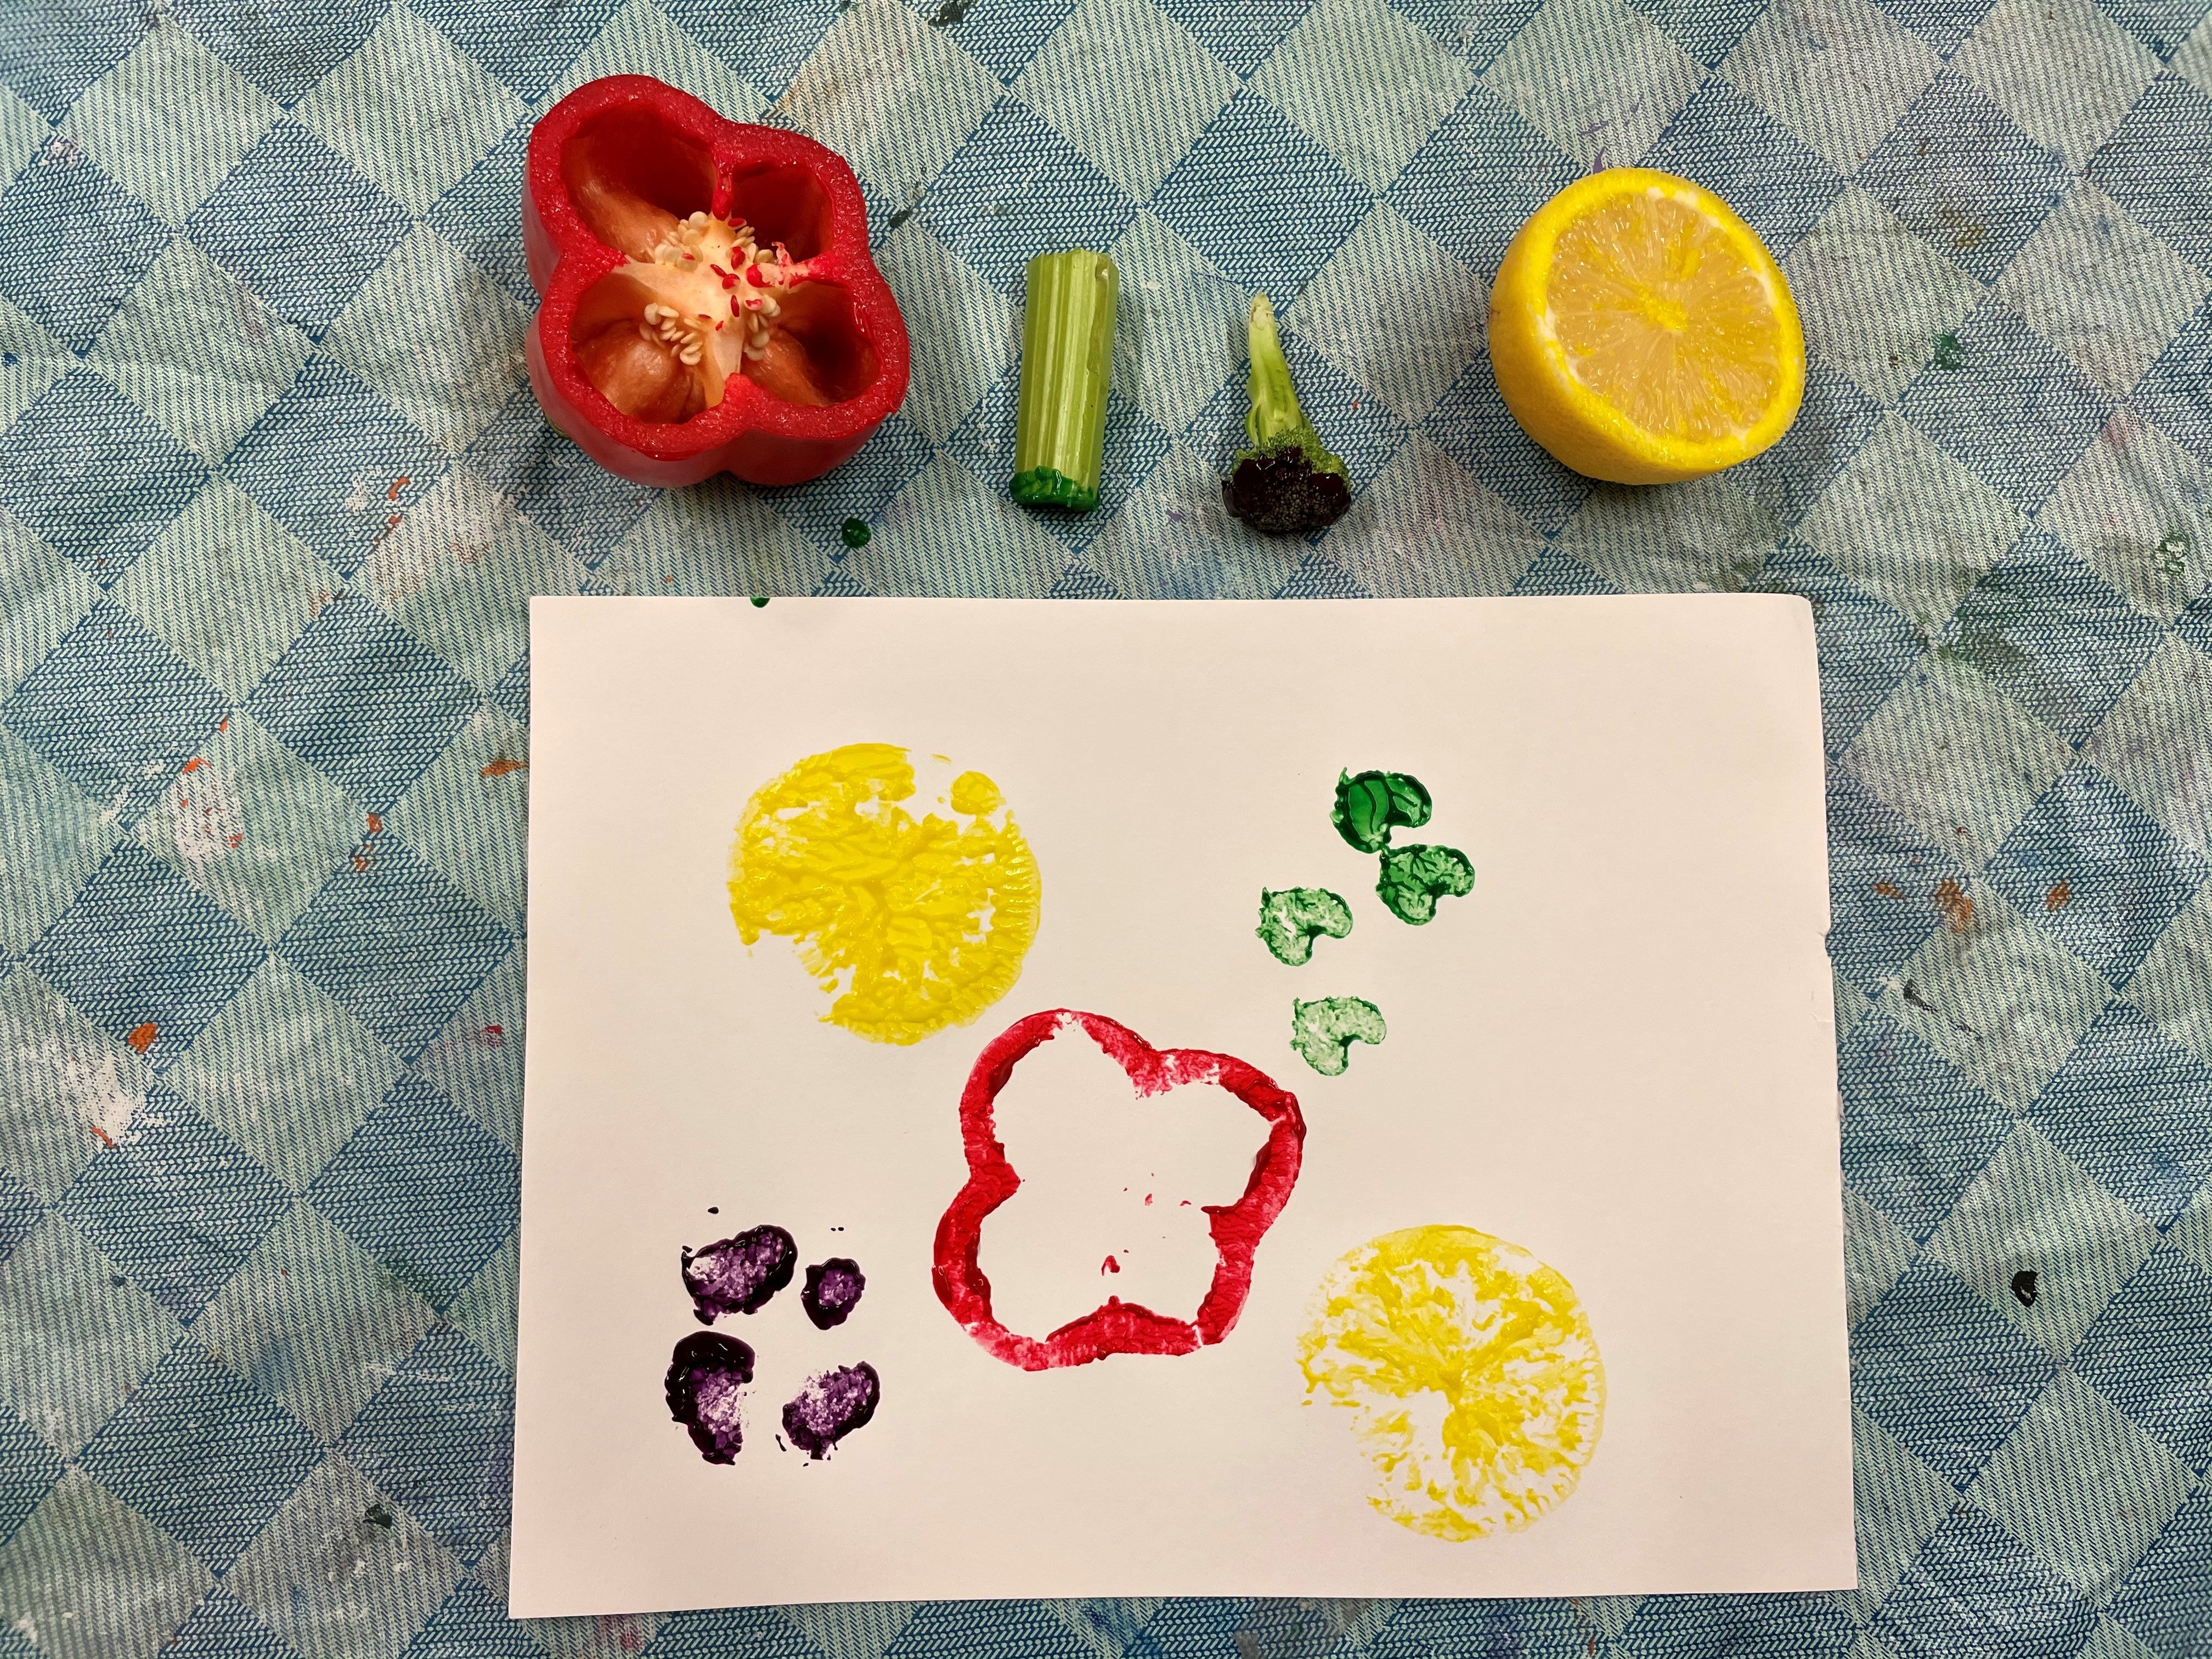 Painting with produce